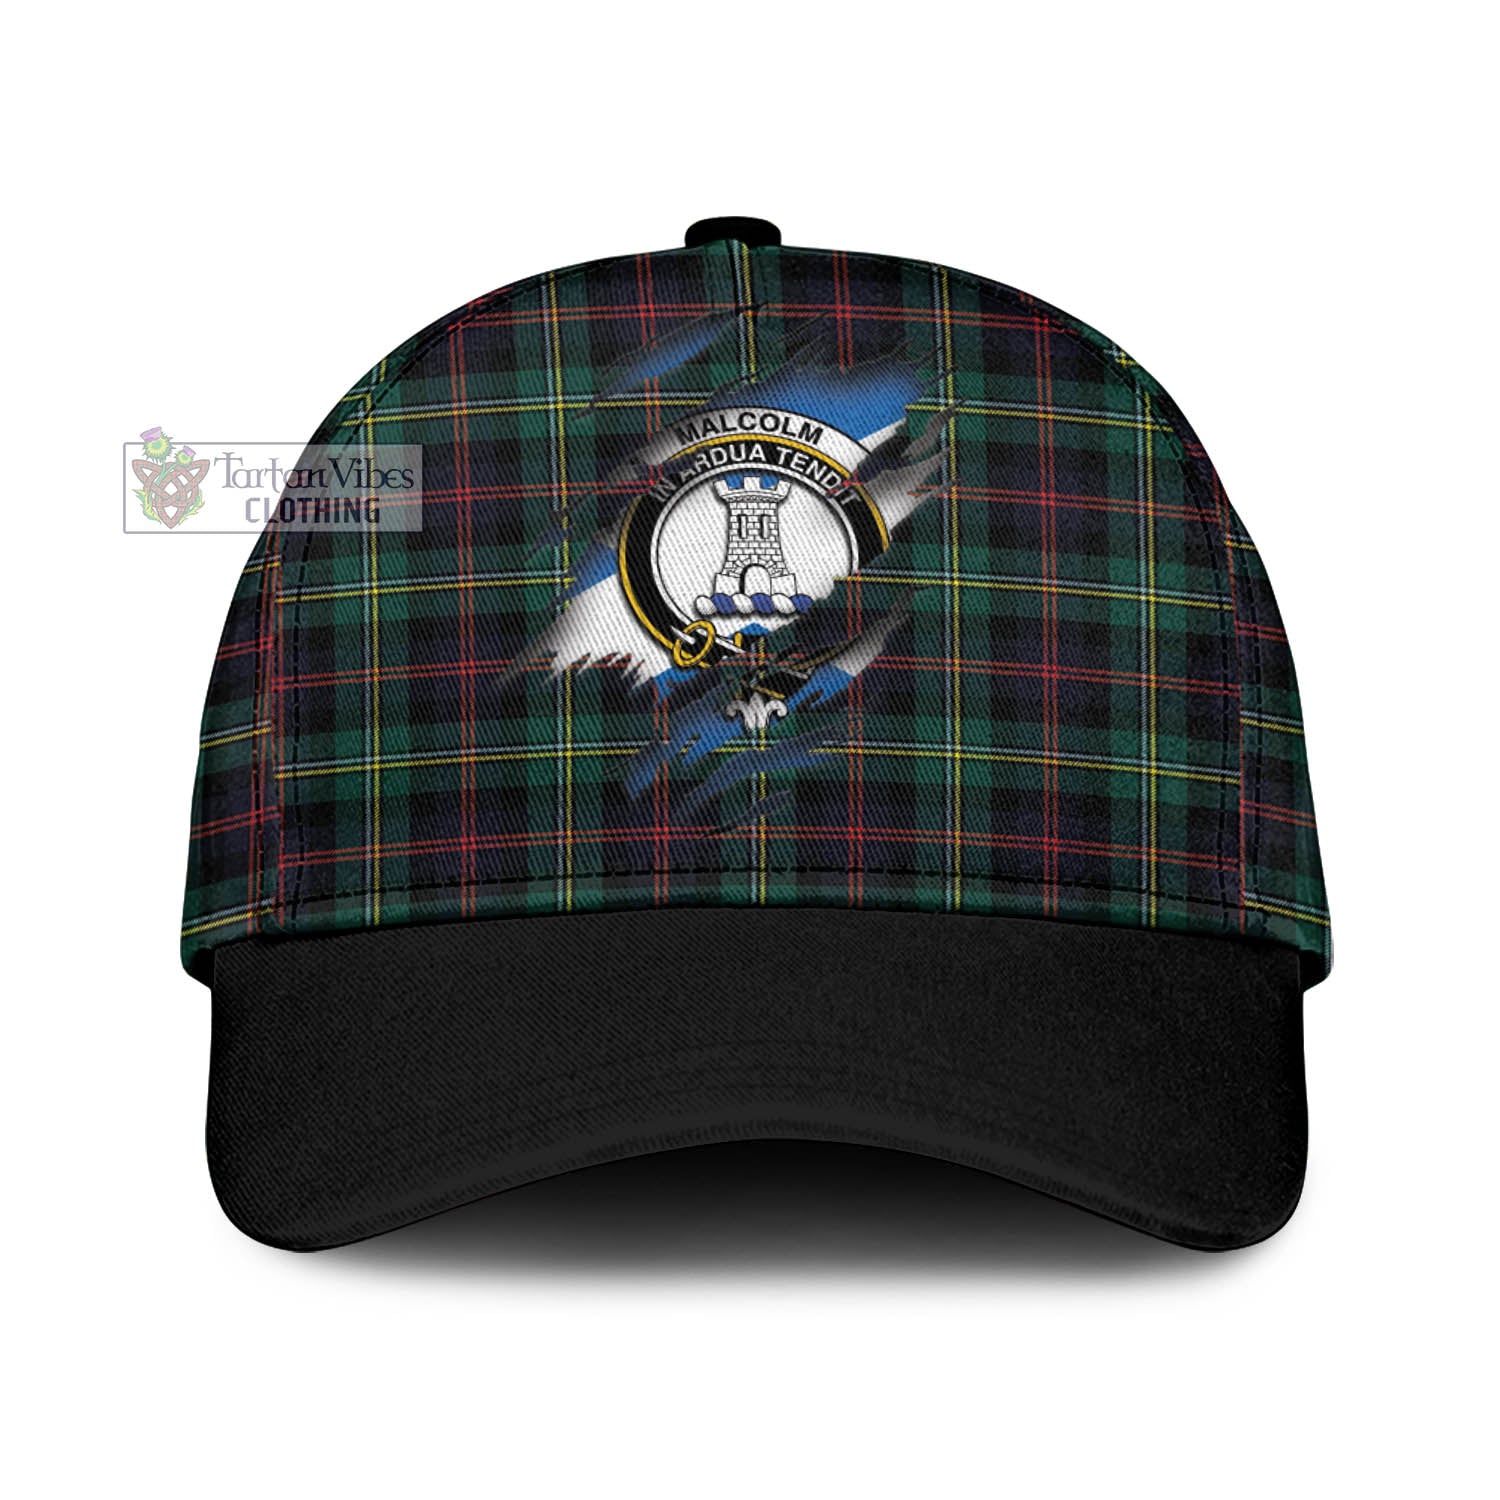 Tartan Vibes Clothing Malcolm Modern Tartan Classic Cap with Family Crest In Me Style